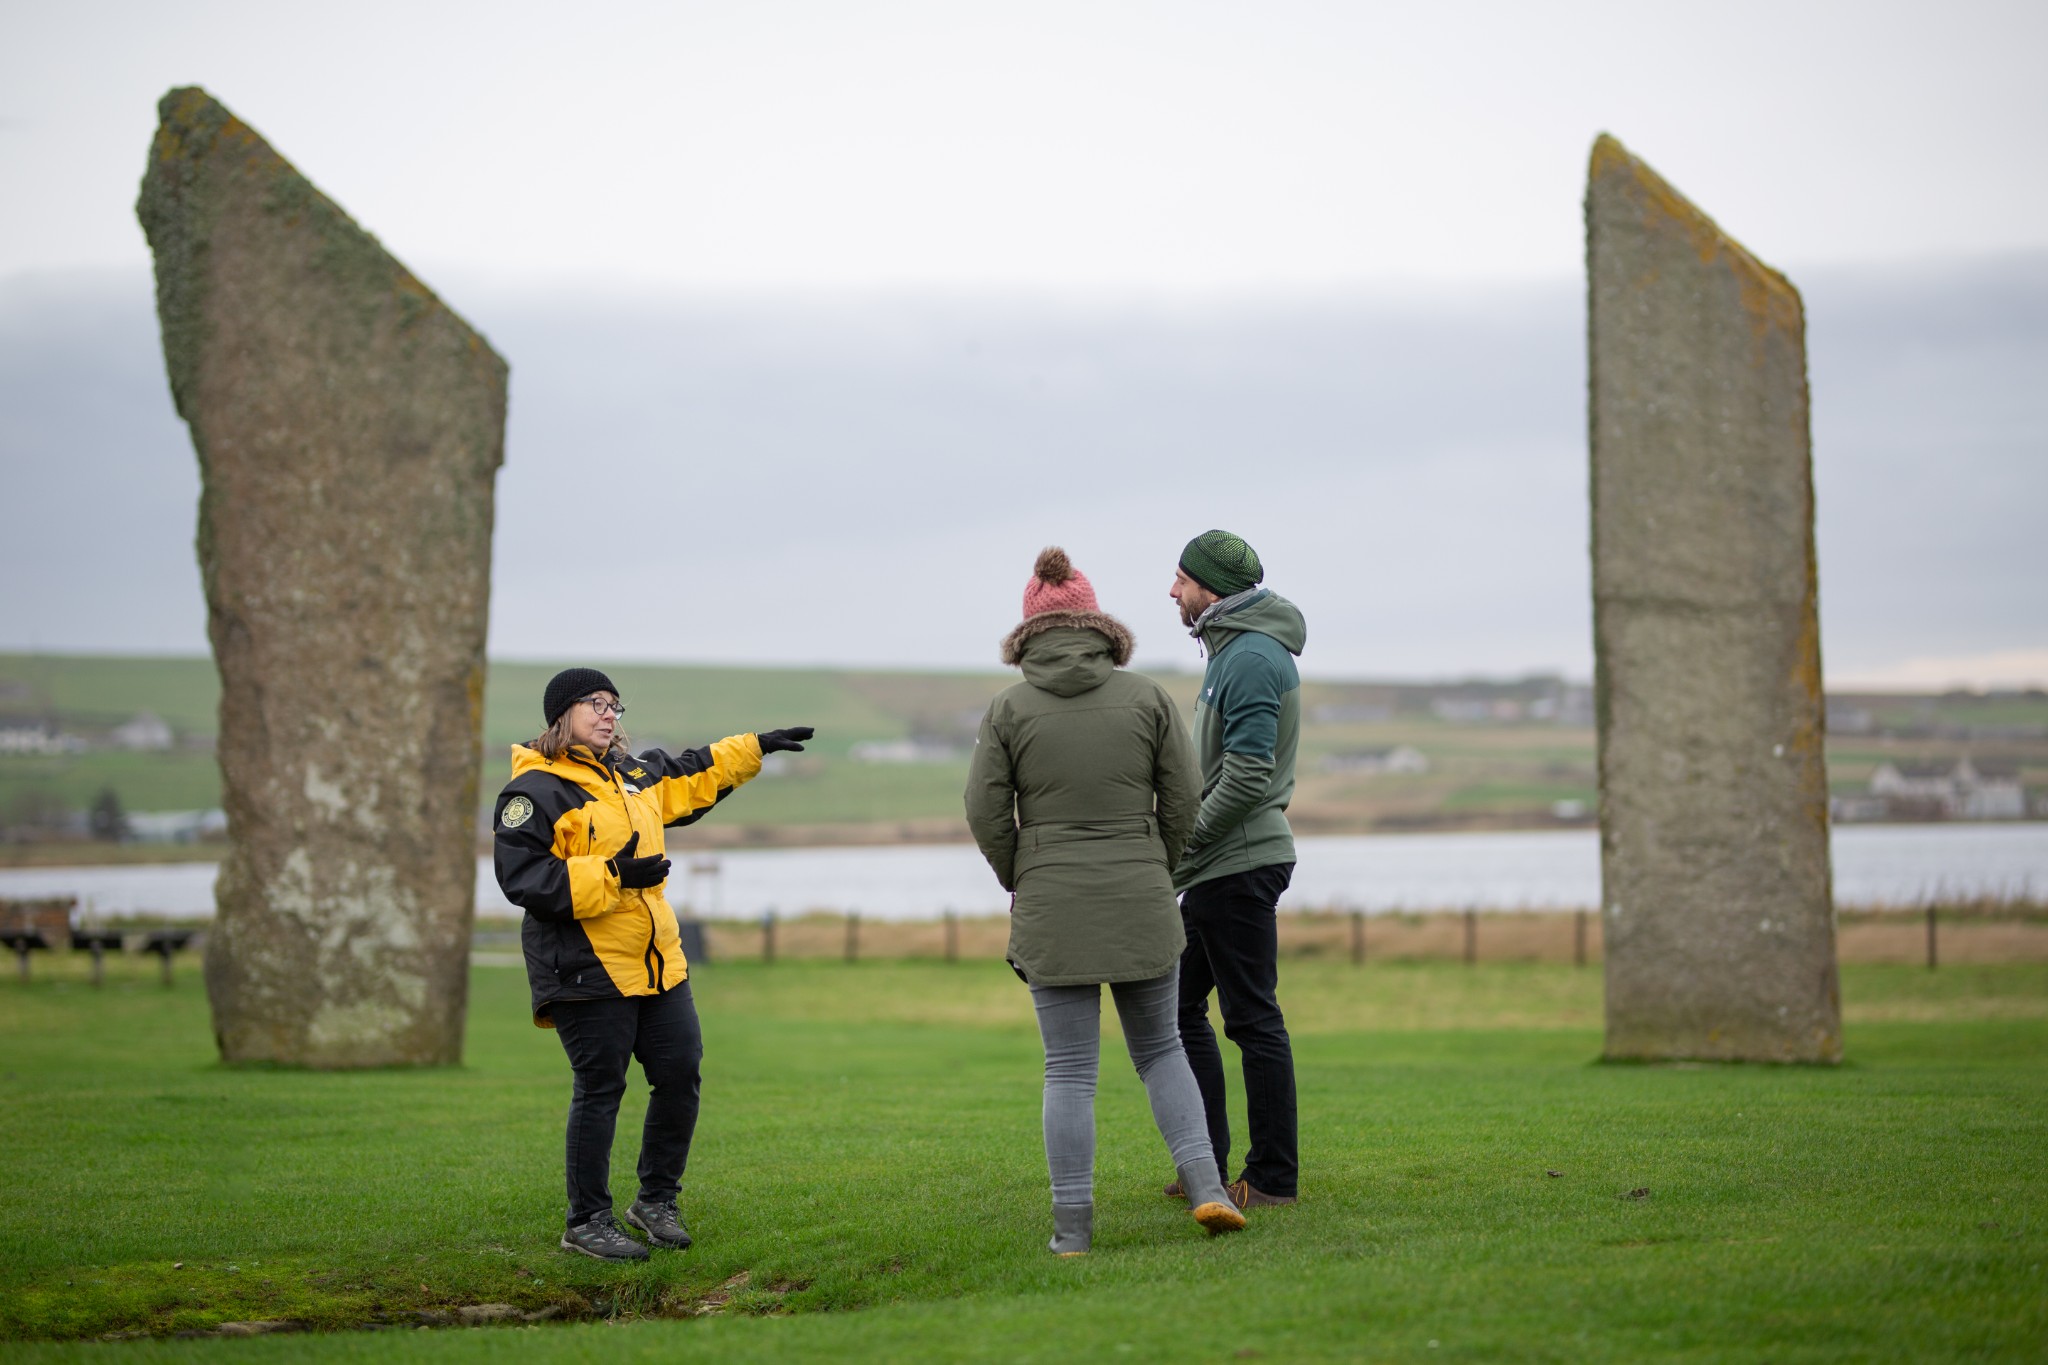 Tour guide at the Standing Stones of Stenness, Orkney